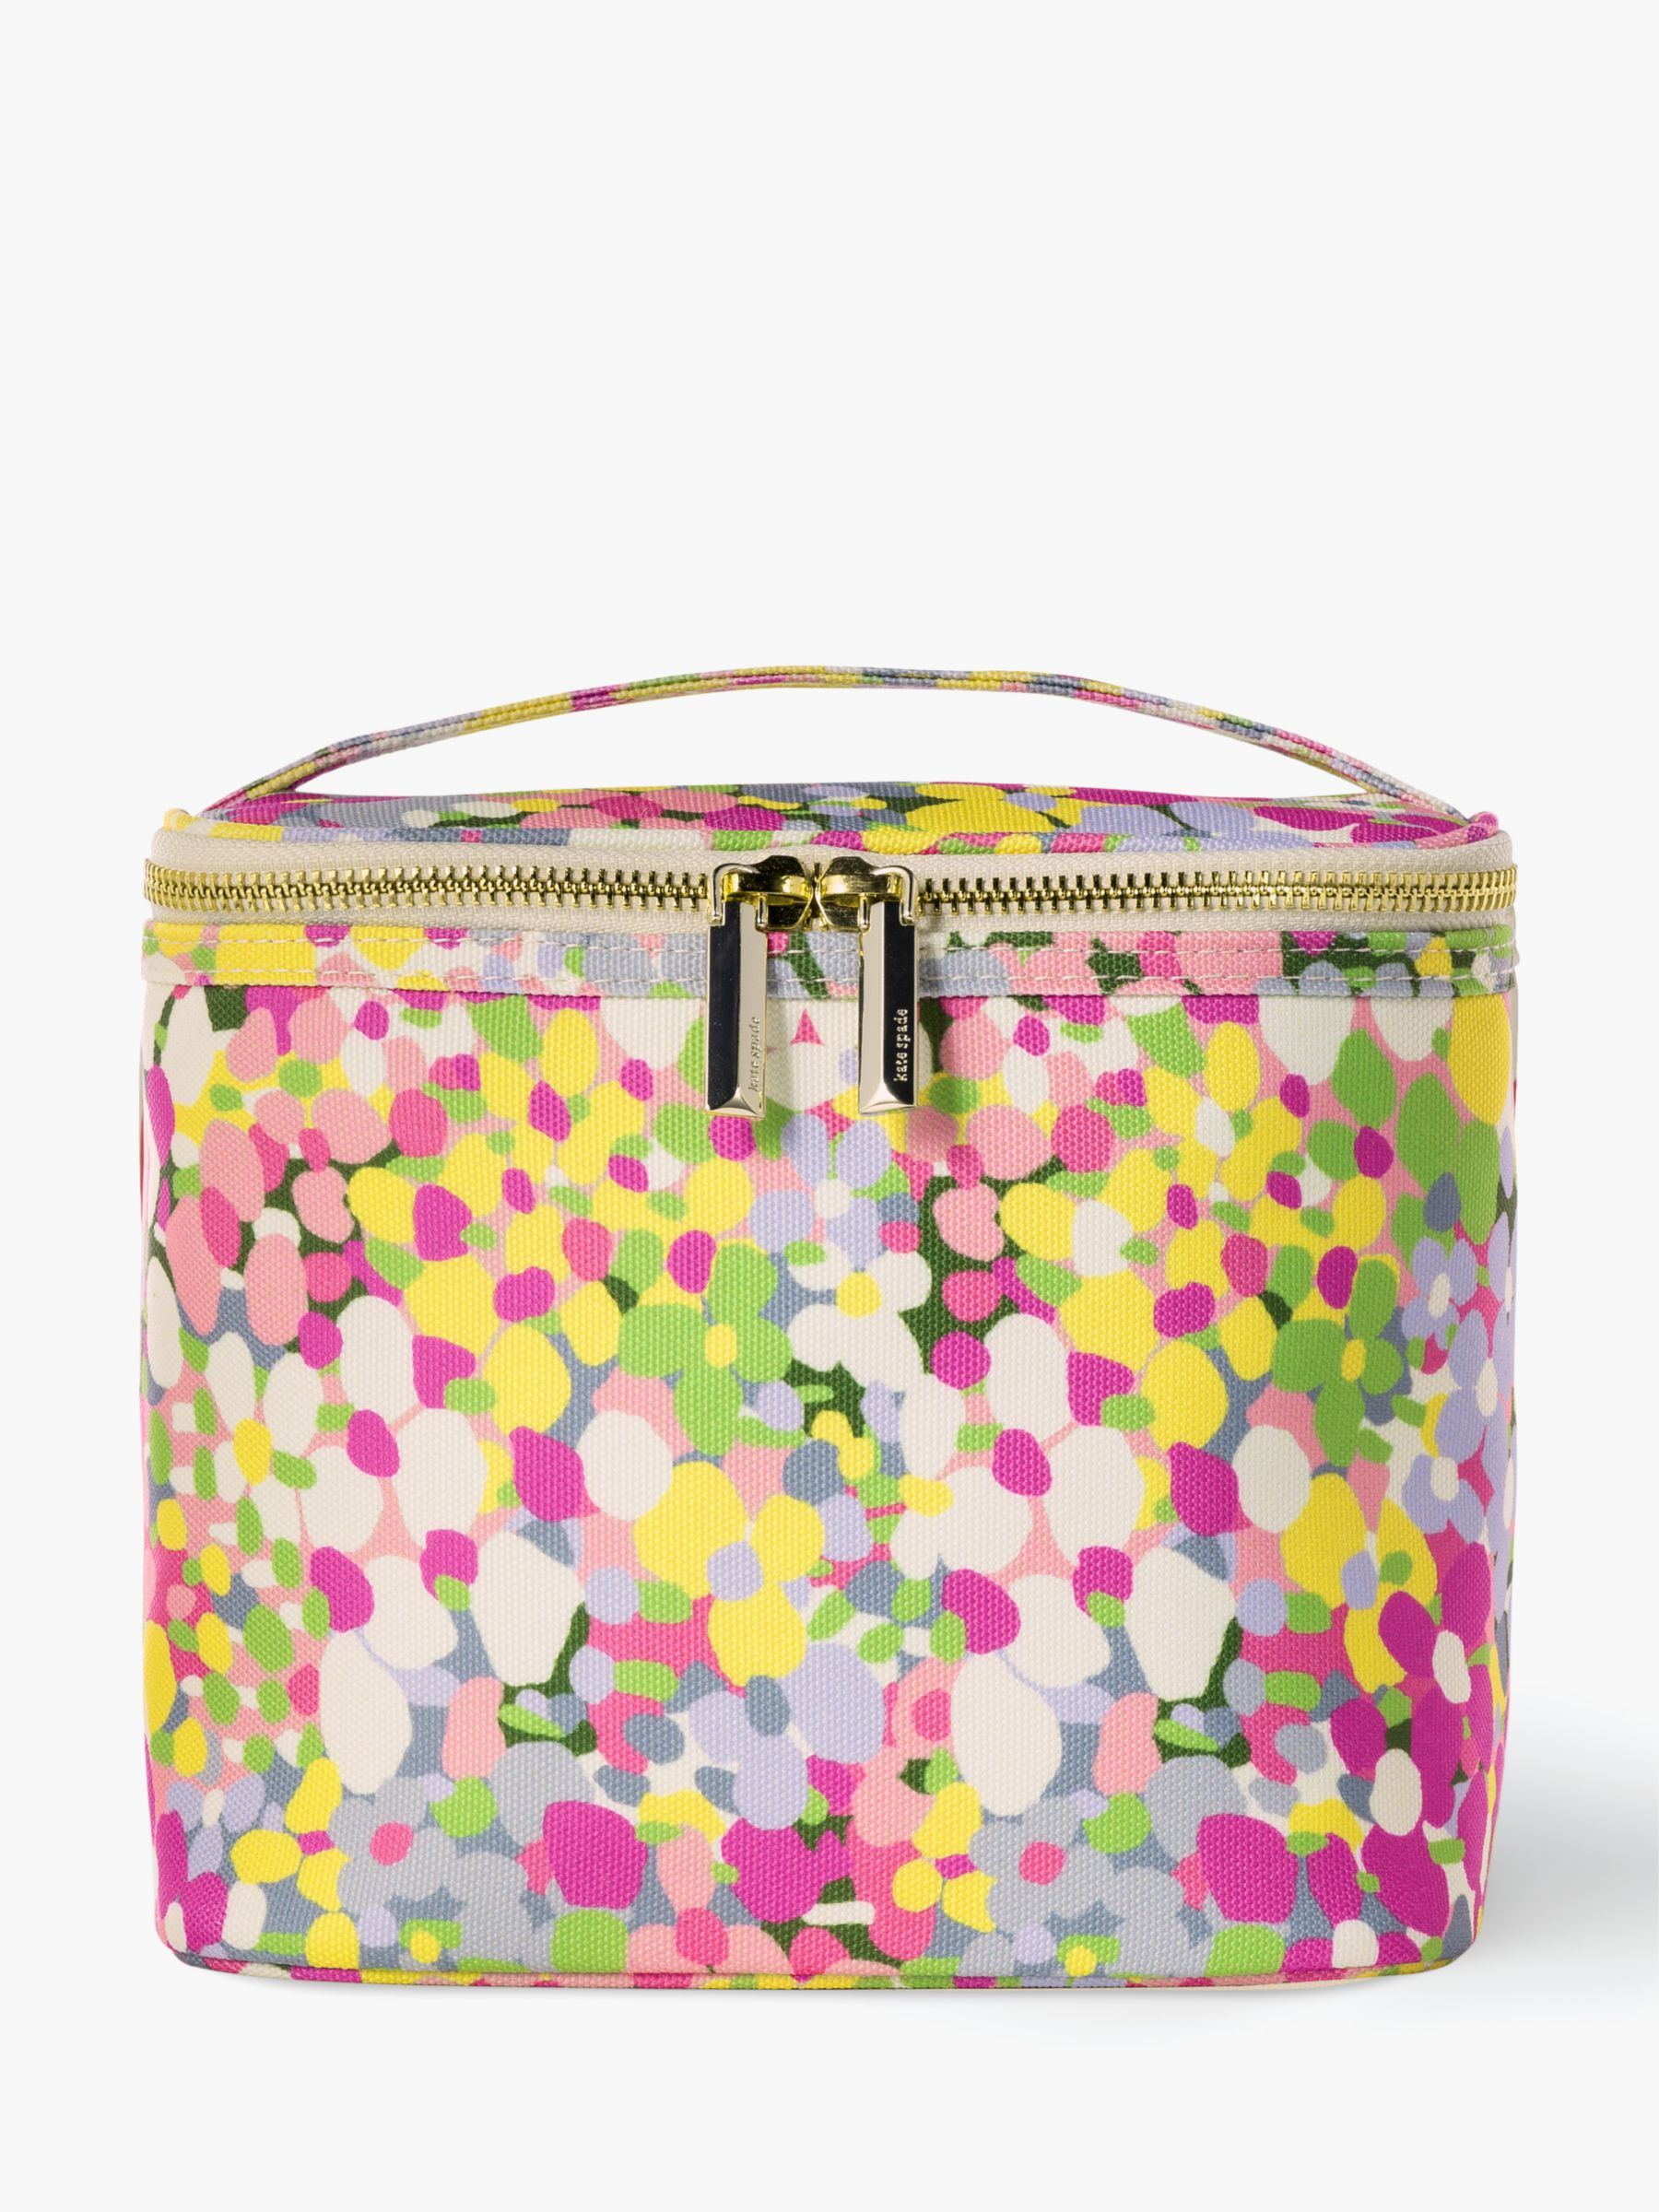 kate spade new york Floral Dot Lunch Tote Bag